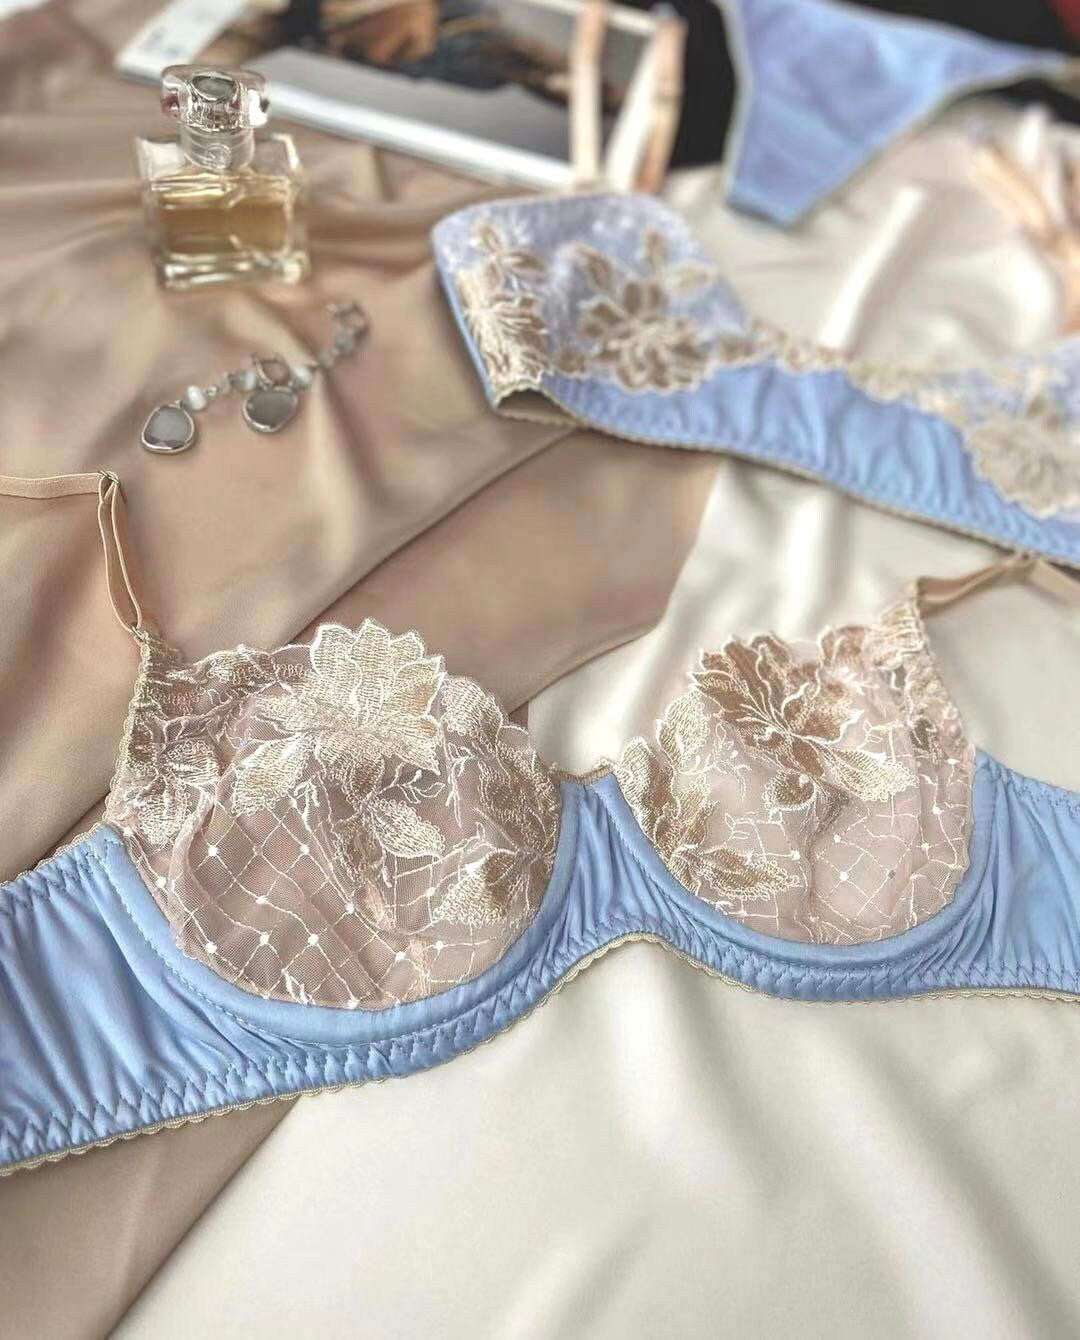 Three Piece Blue and Gold Lingerie Set